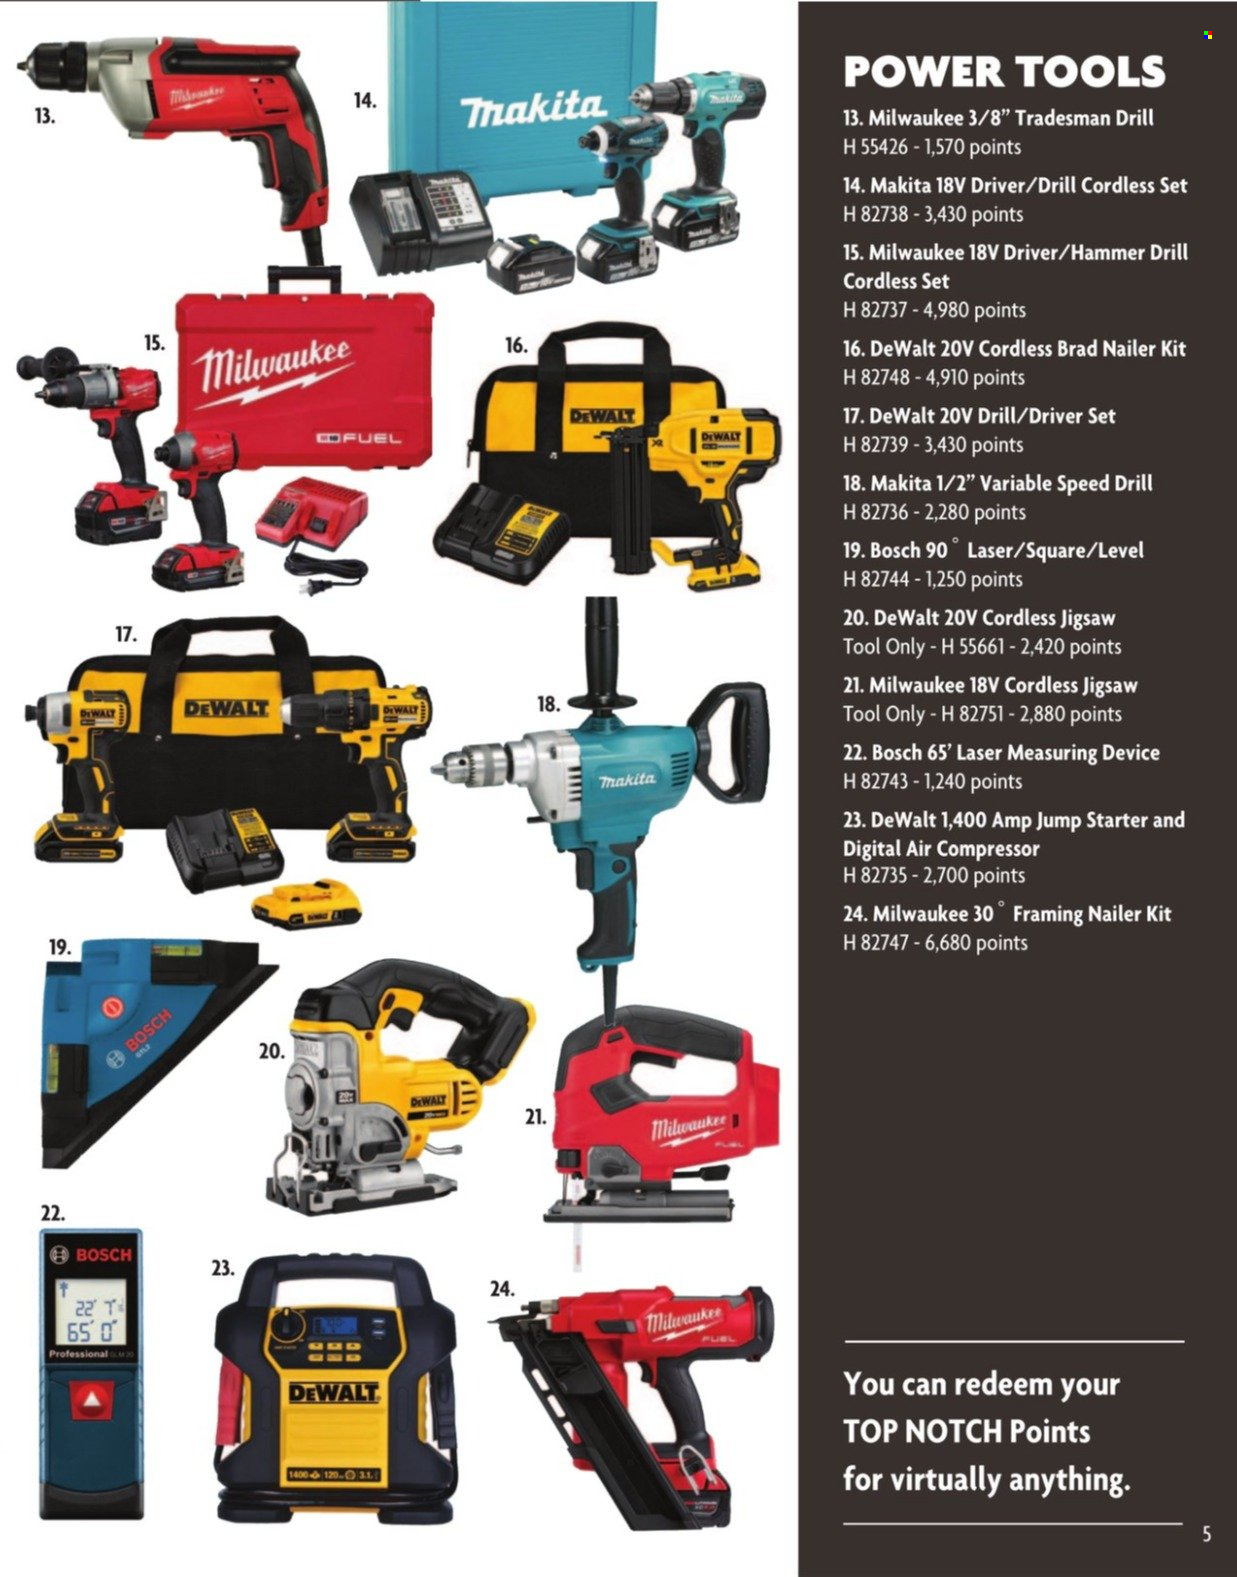 thumbnail - Home Hardware Flyer - November 22, 2021 - December 31, 2021 - Sales products - Bosch, Milwaukee, DeWALT, drill, power tools, Makita, air compressor. Page 5.